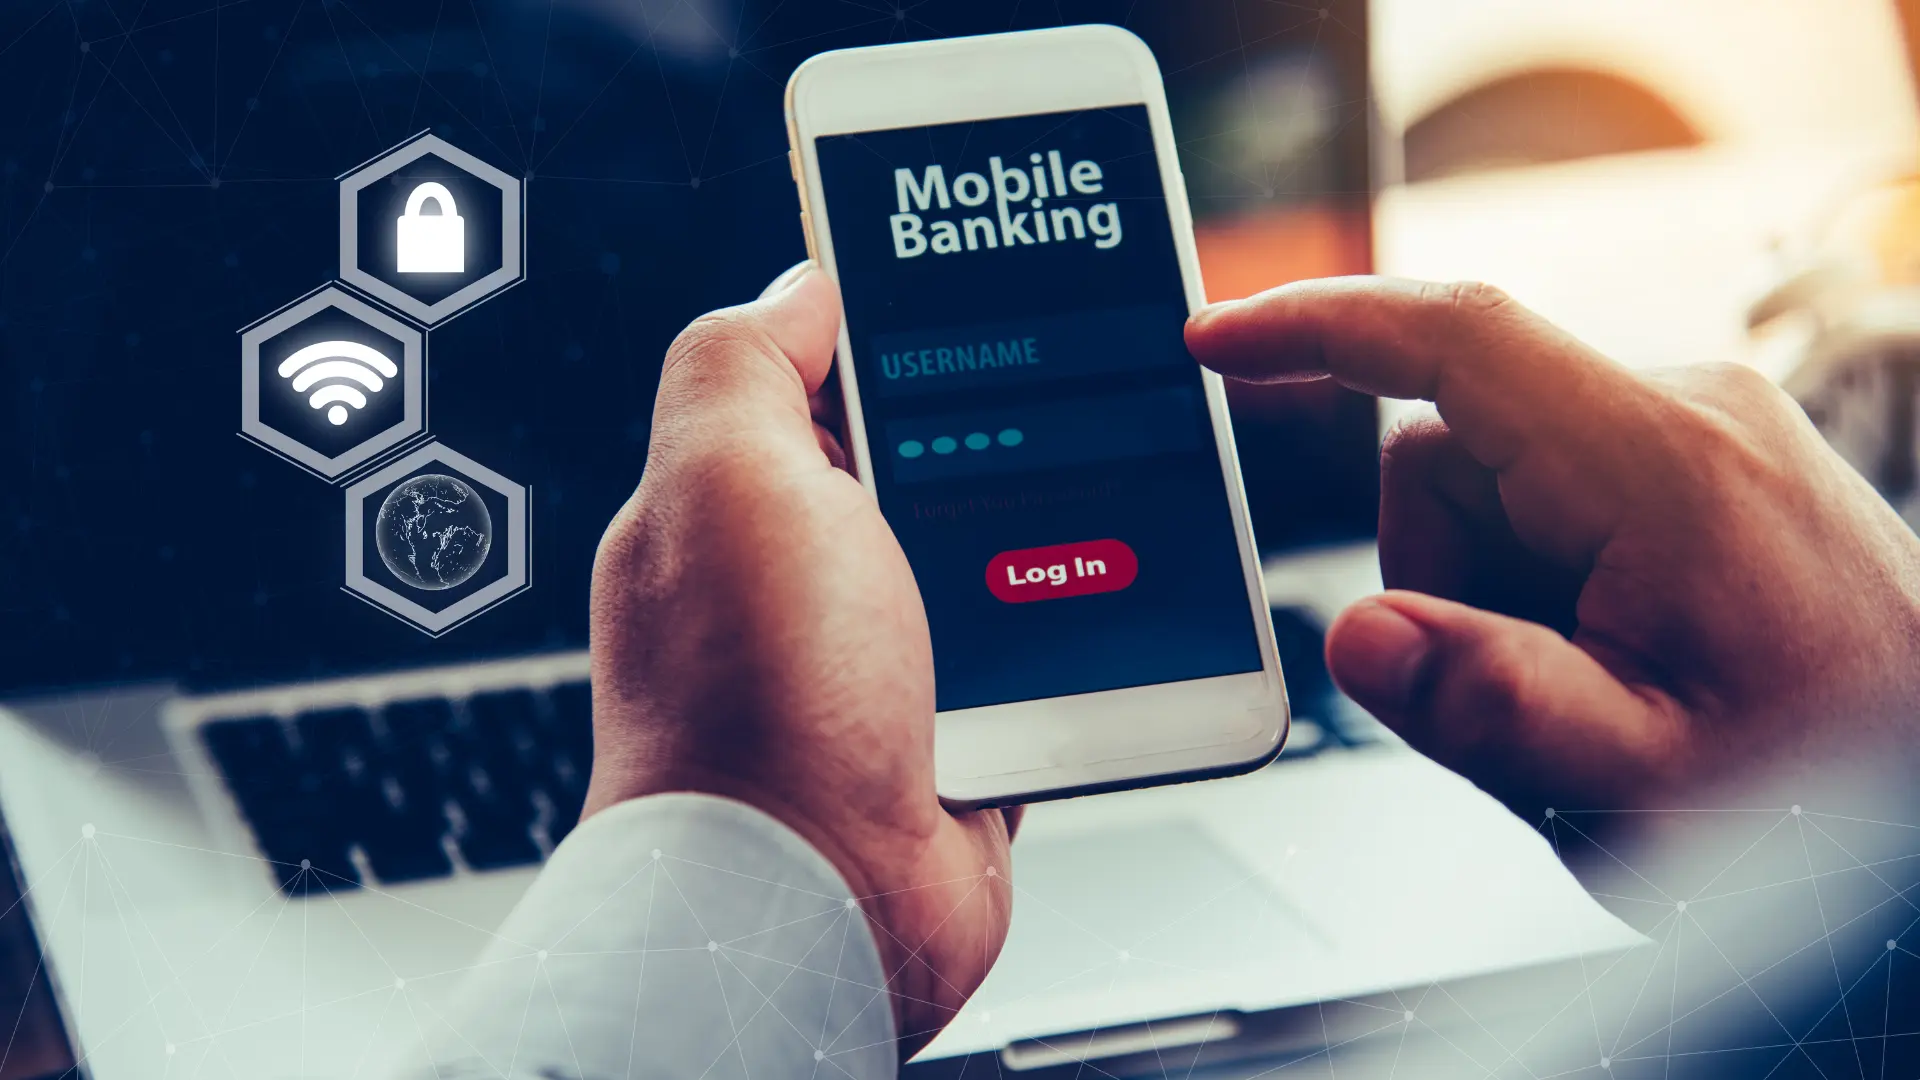 Security While Banking on Mobile Device